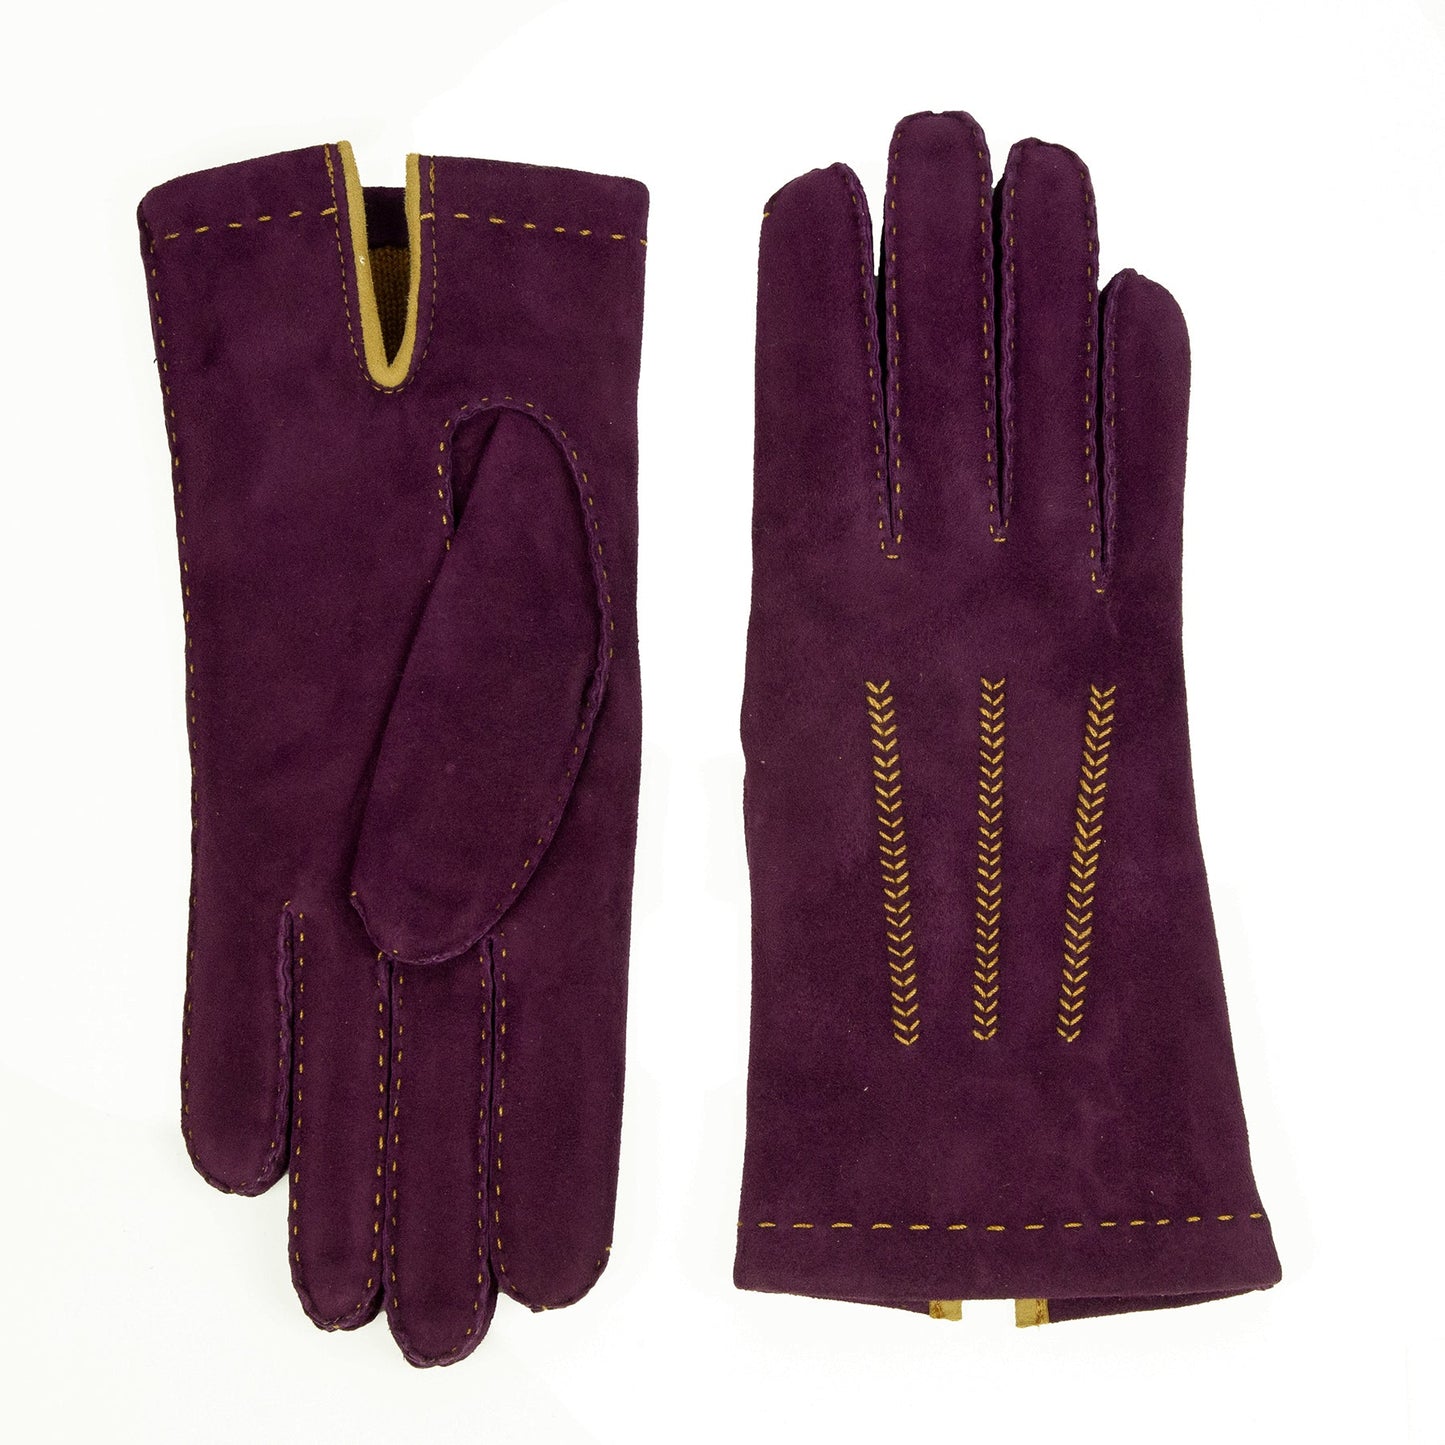 Bespoke Women's classic suede leather gloves entirely hand-sewn with cashmere lining